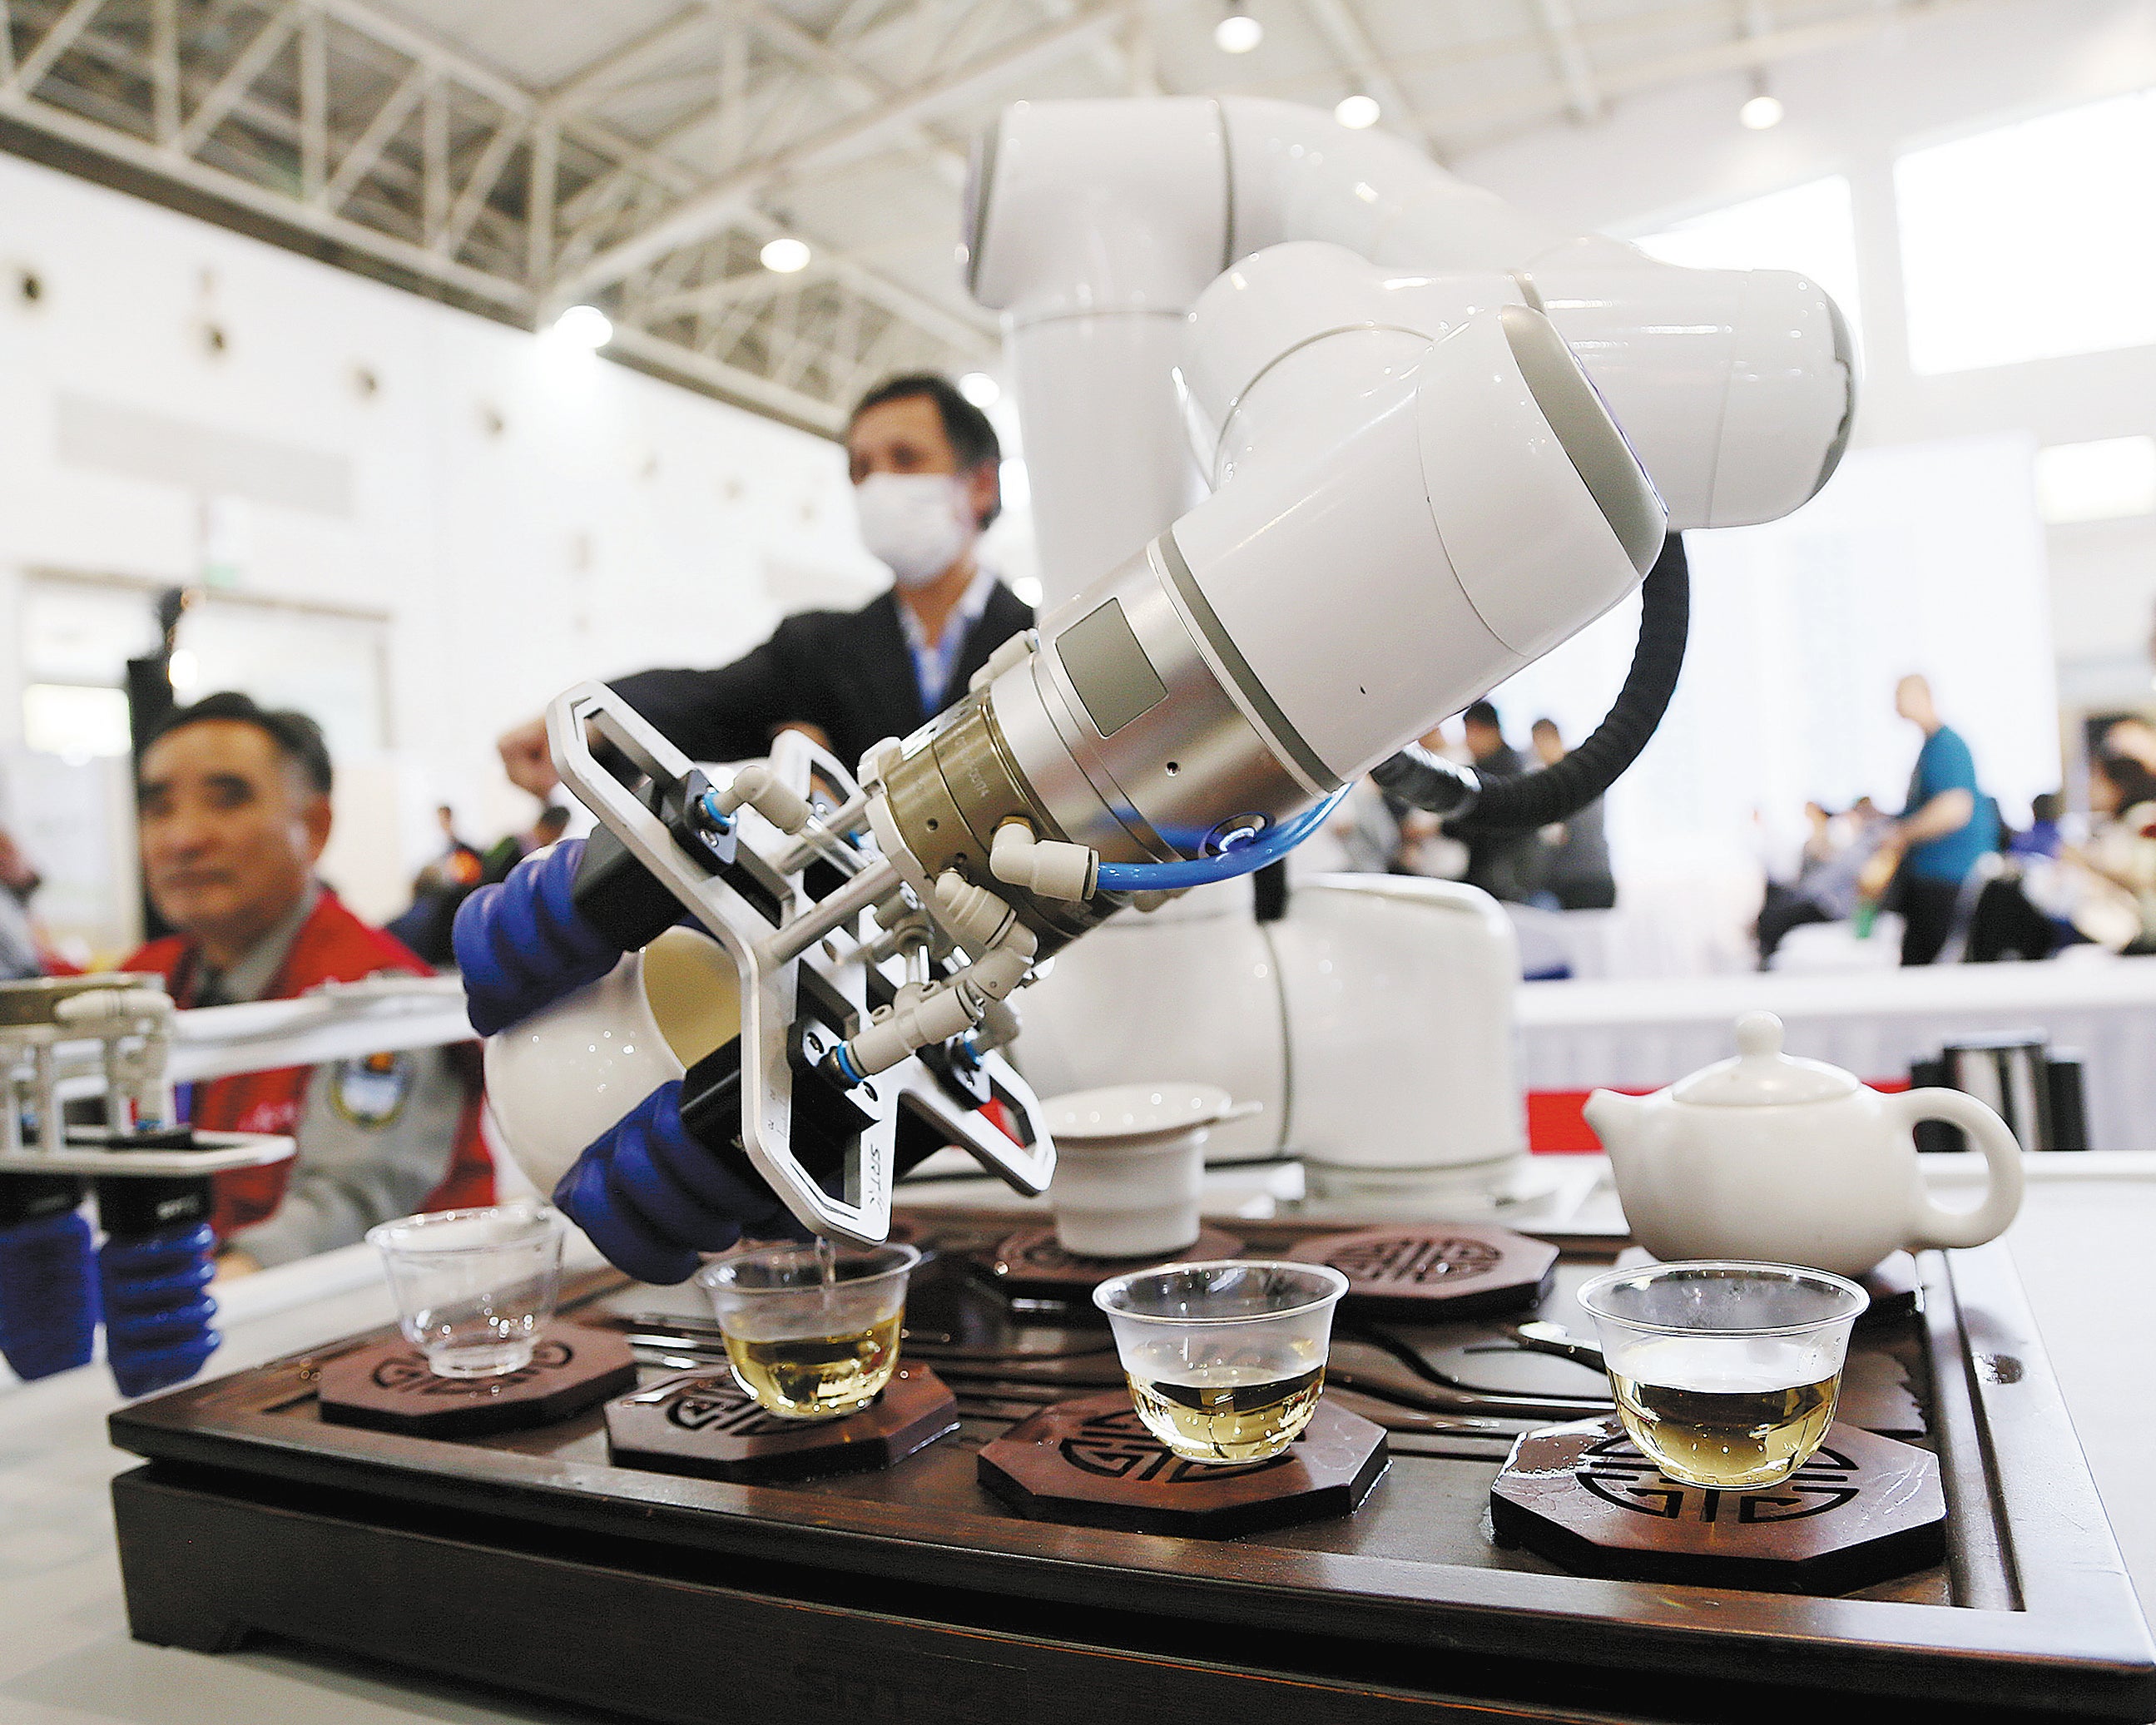 A robot serves tea to visitors during a tea expo in Beijing in April